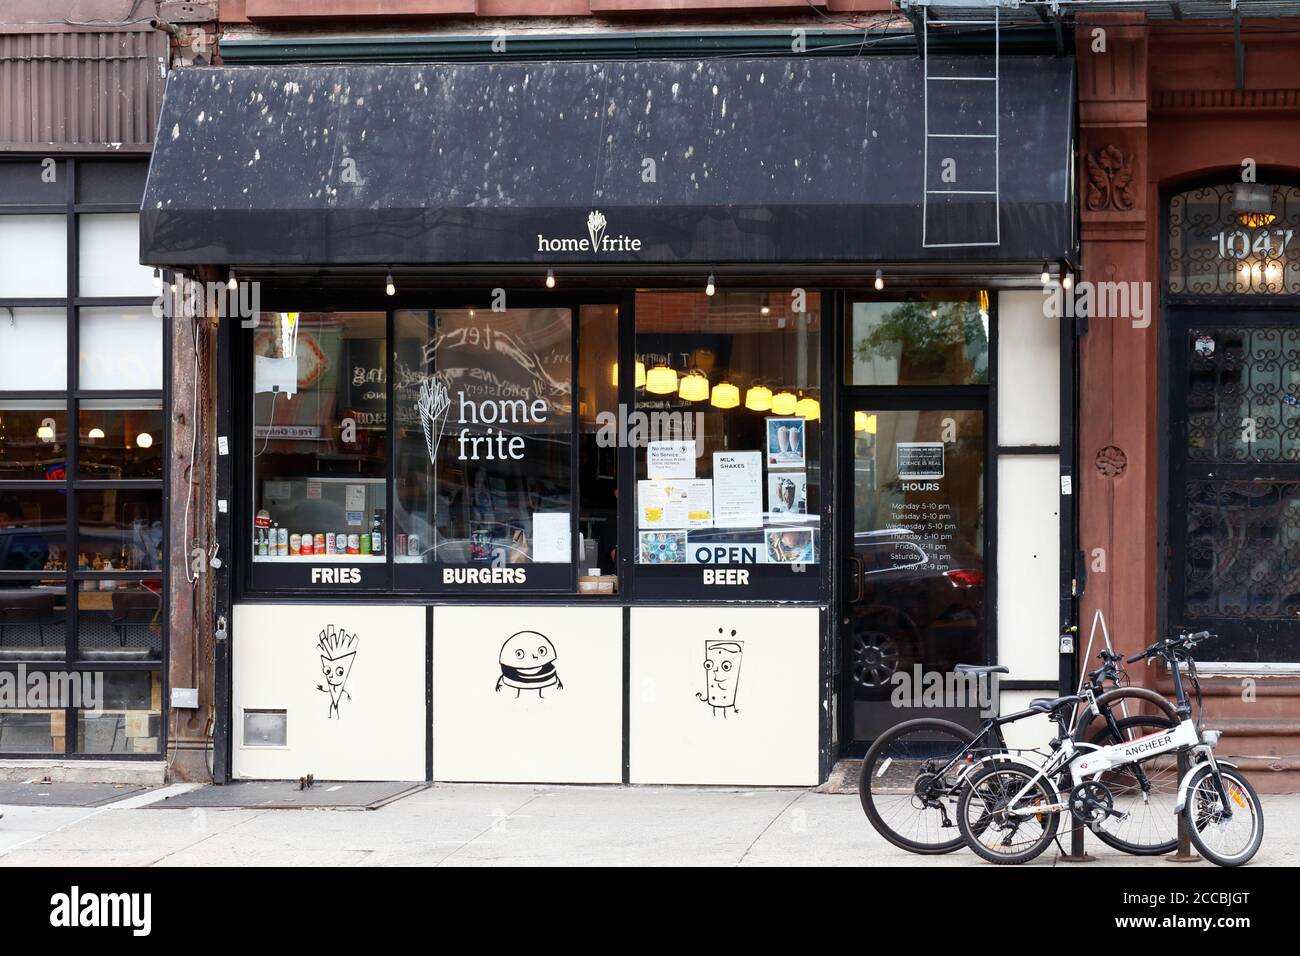 Home Frite, 1047 Bedford Ave, Brooklyn, New York. NYC storefront photo of a hamburger and belgian fries restaurant in the Bedford Stuyvesant neighborh Stock Photo